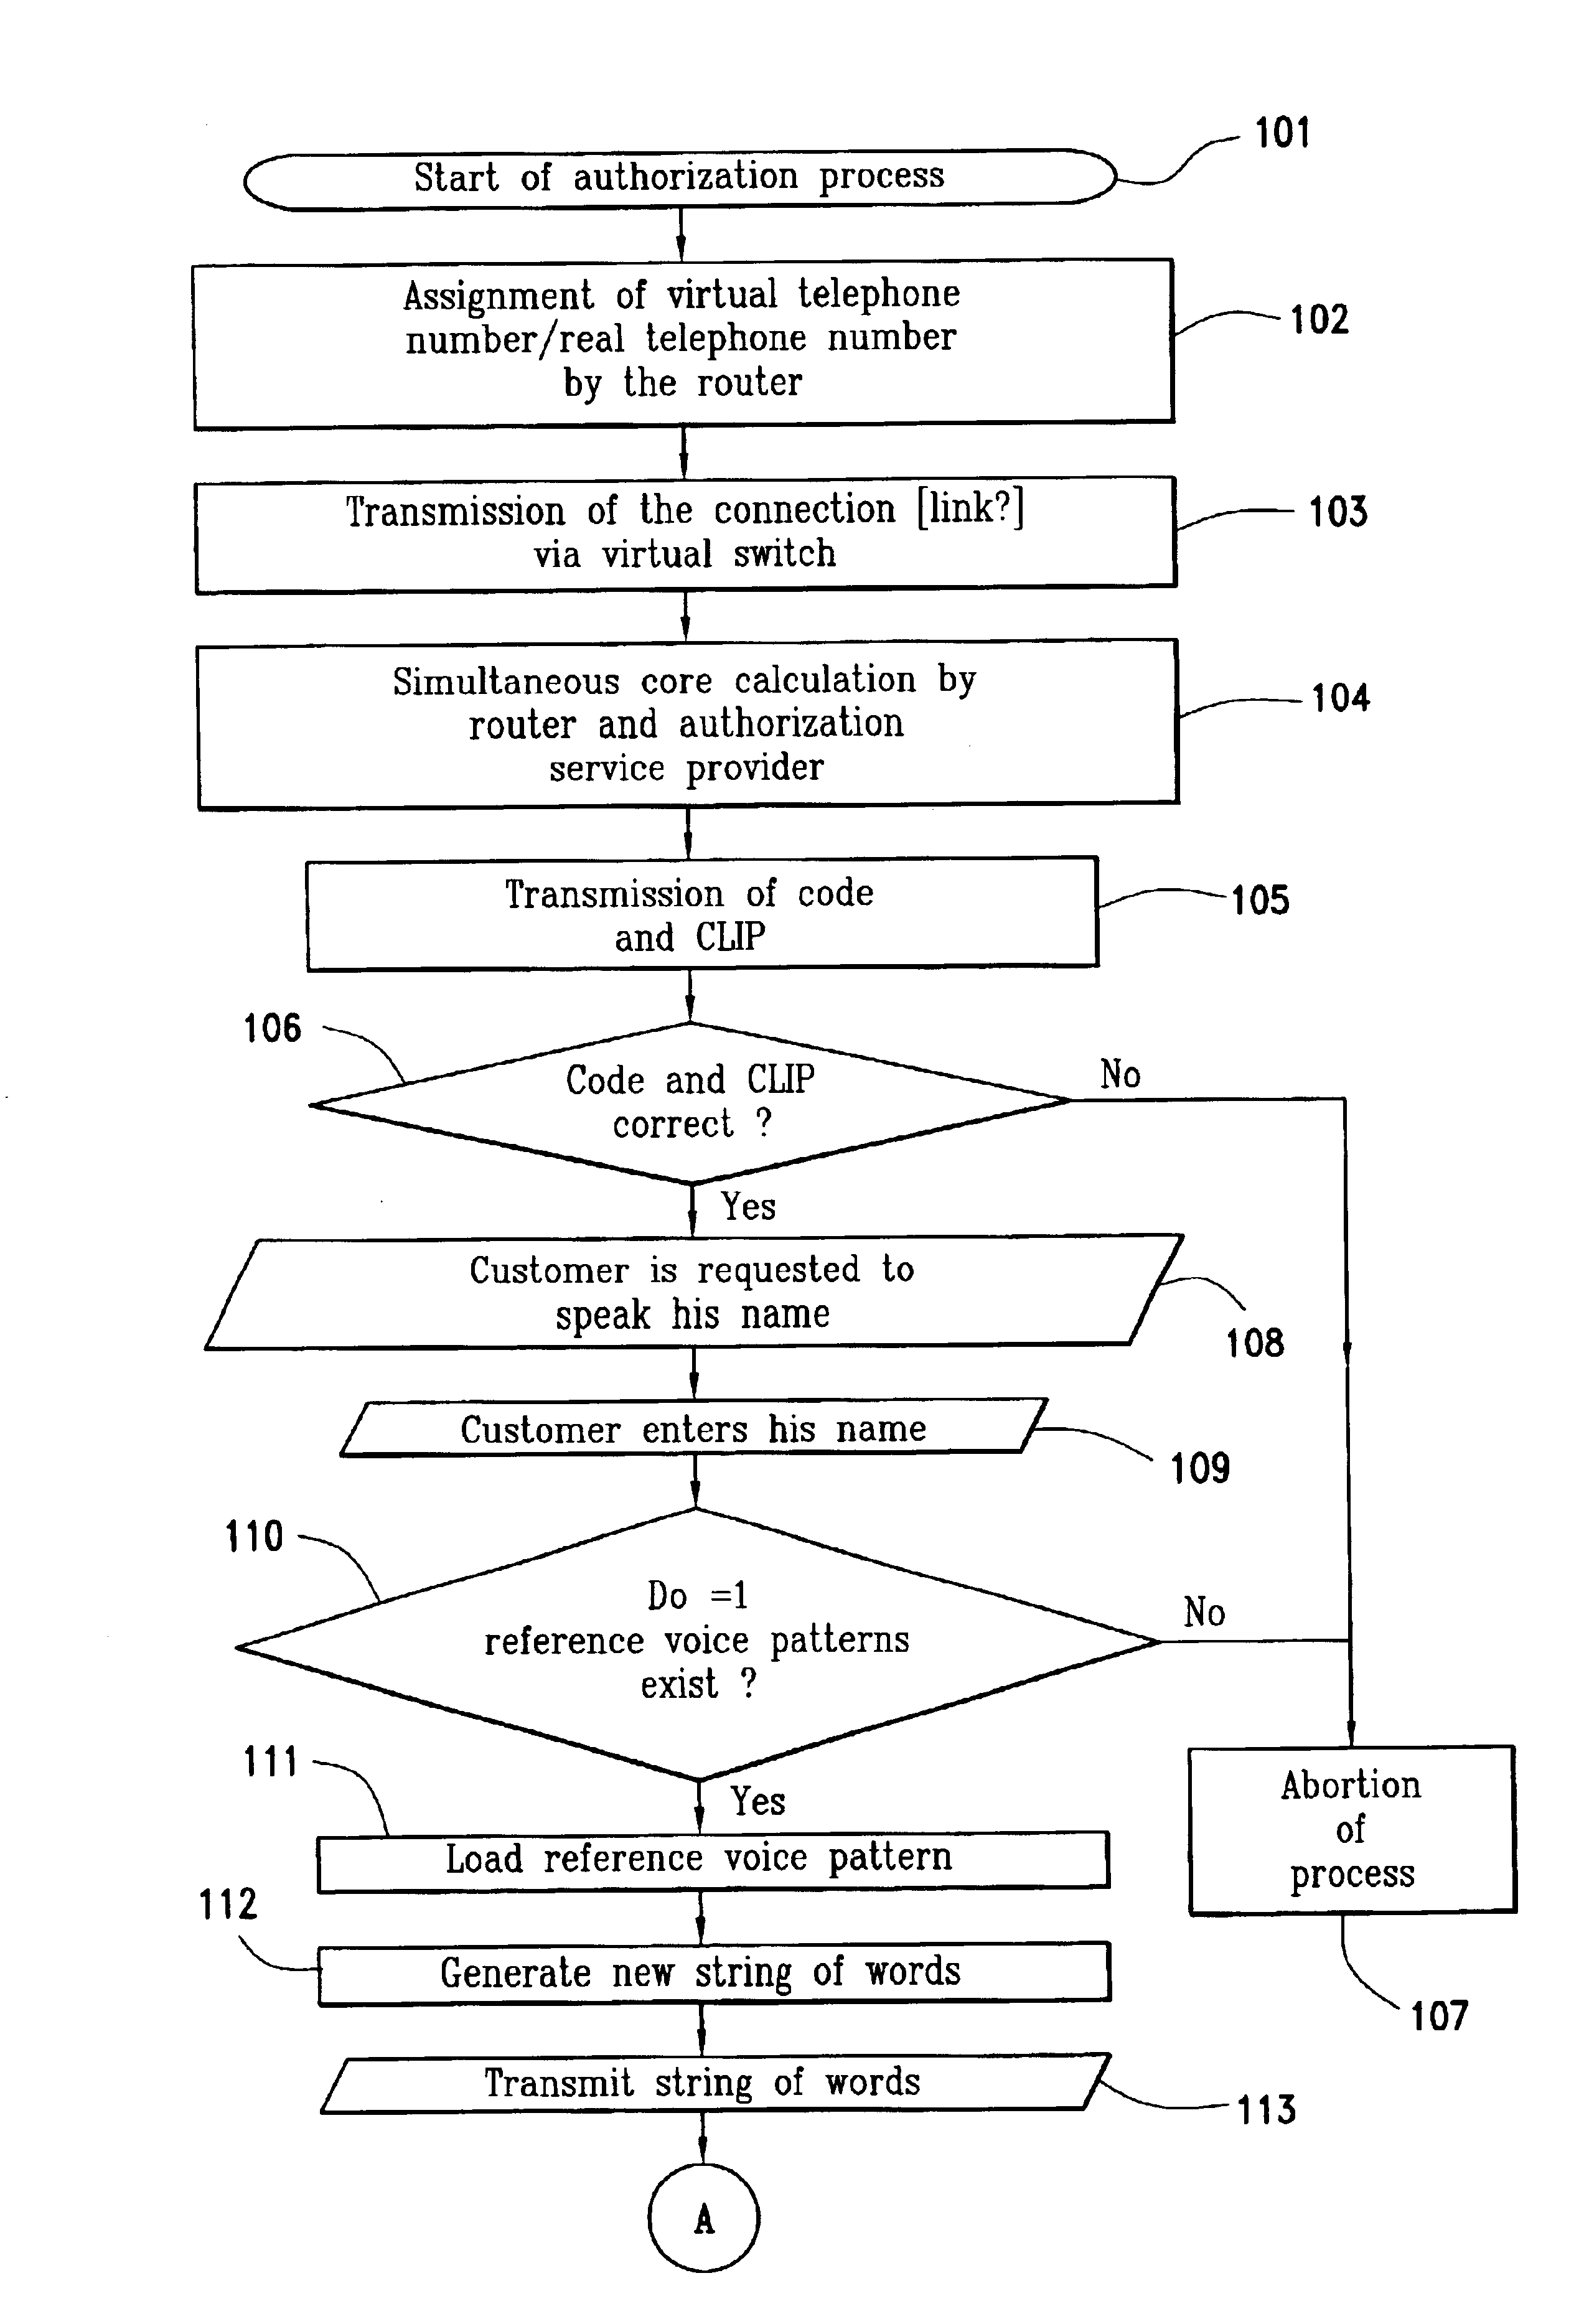 Method and system for authorizing a commercial transaction